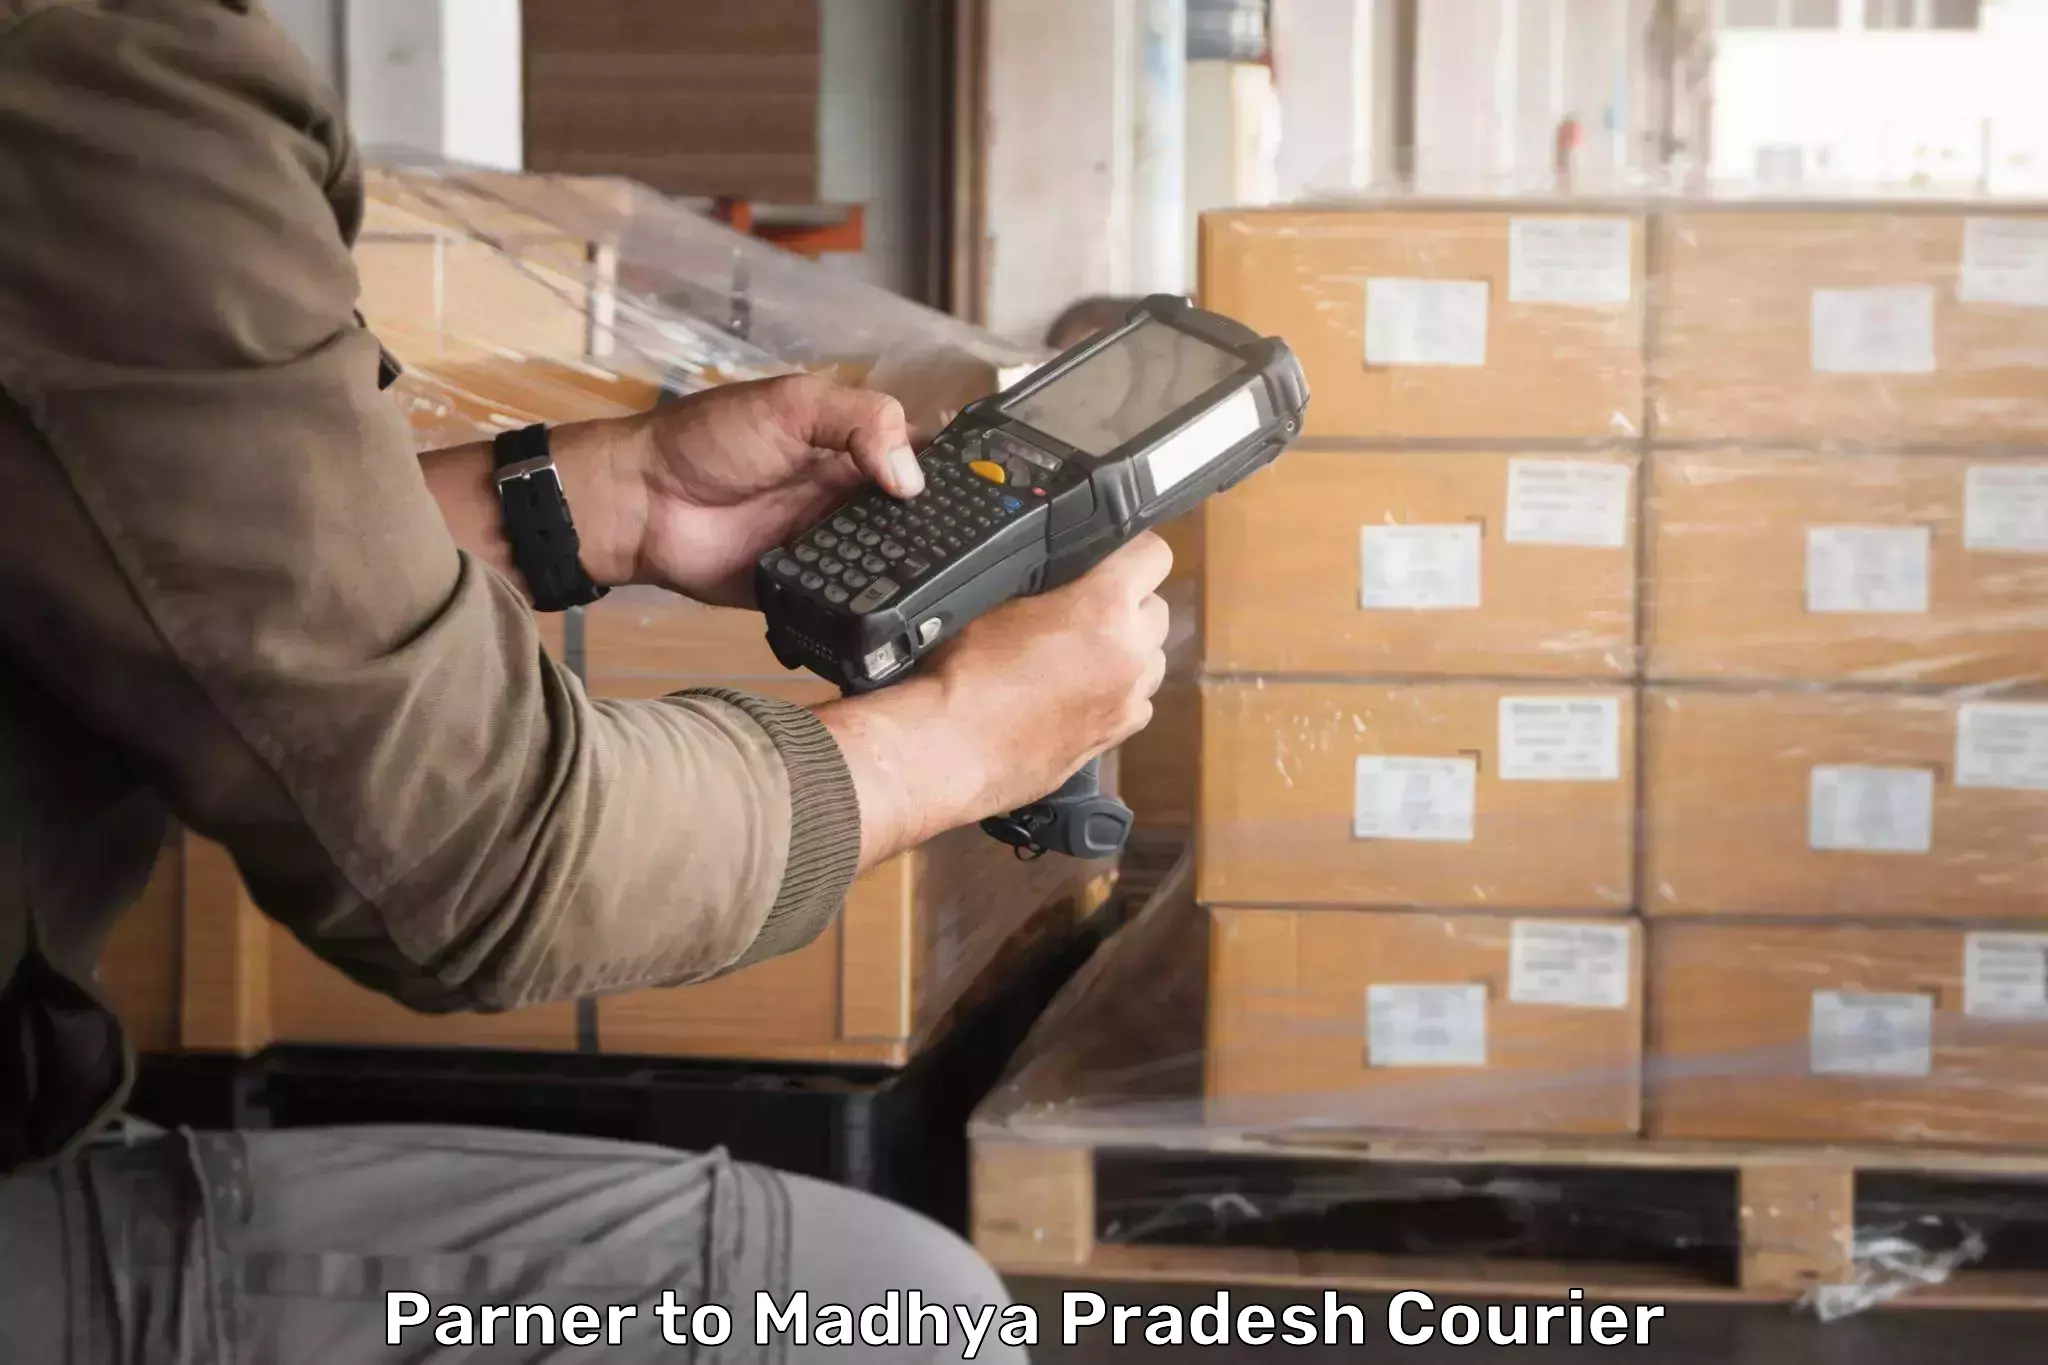 Courier tracking online Parner to Gwalior